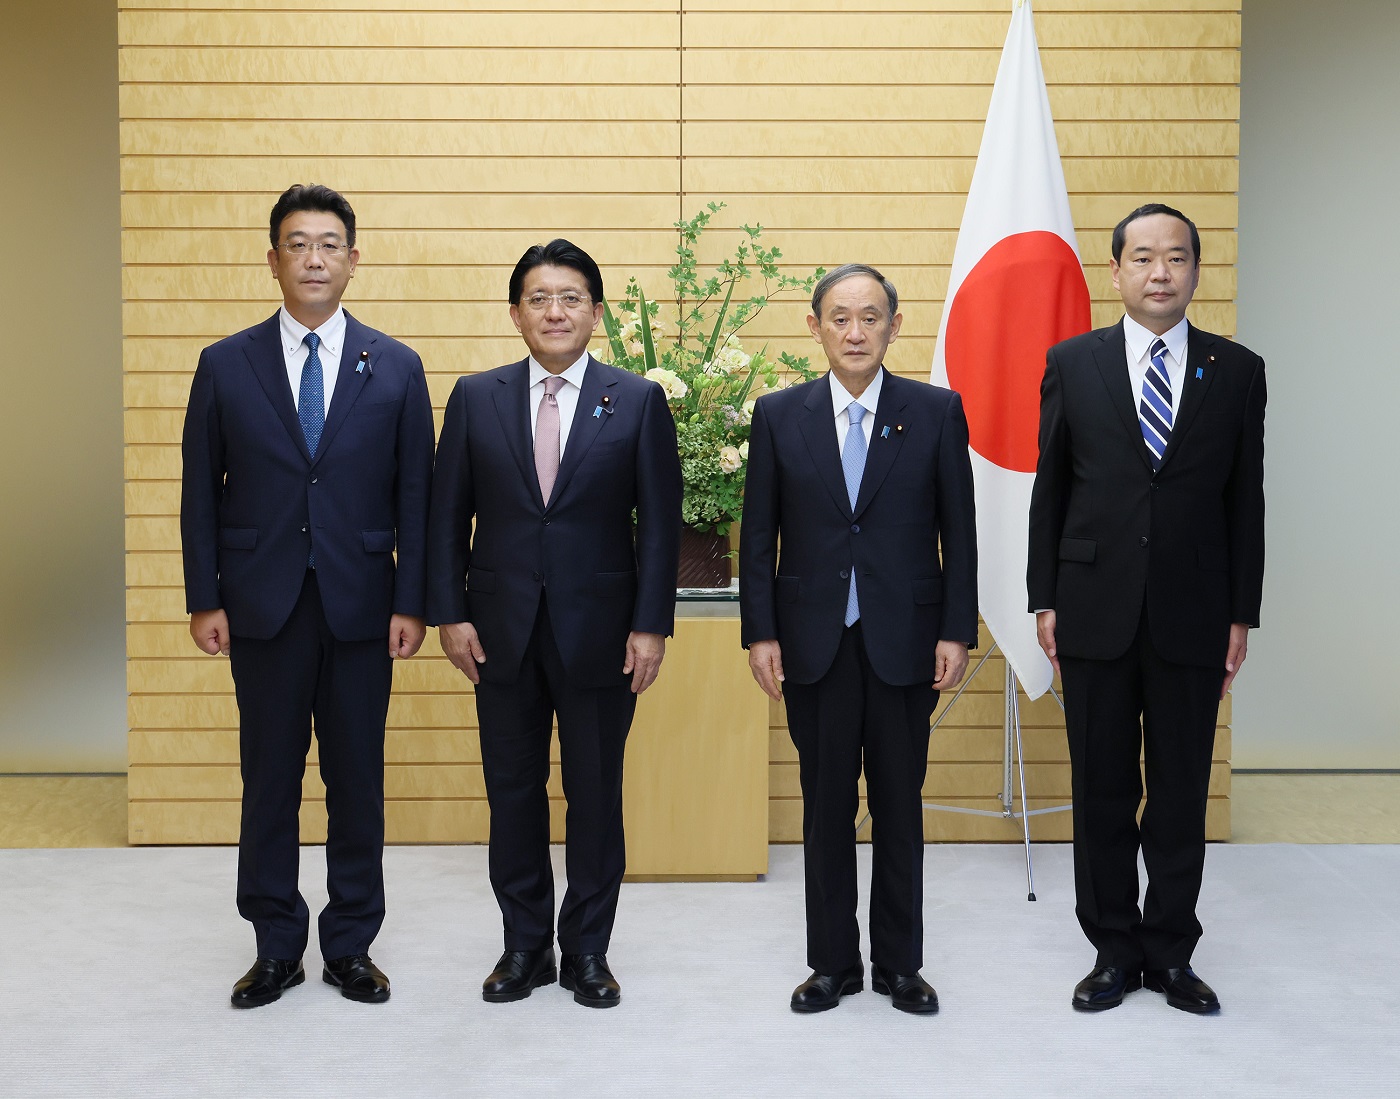 Photograph of the Prime Minister attending a photograph session with Minister Hirai, State Minister Fujii, and Parliamentary Vice-Minister Okashita